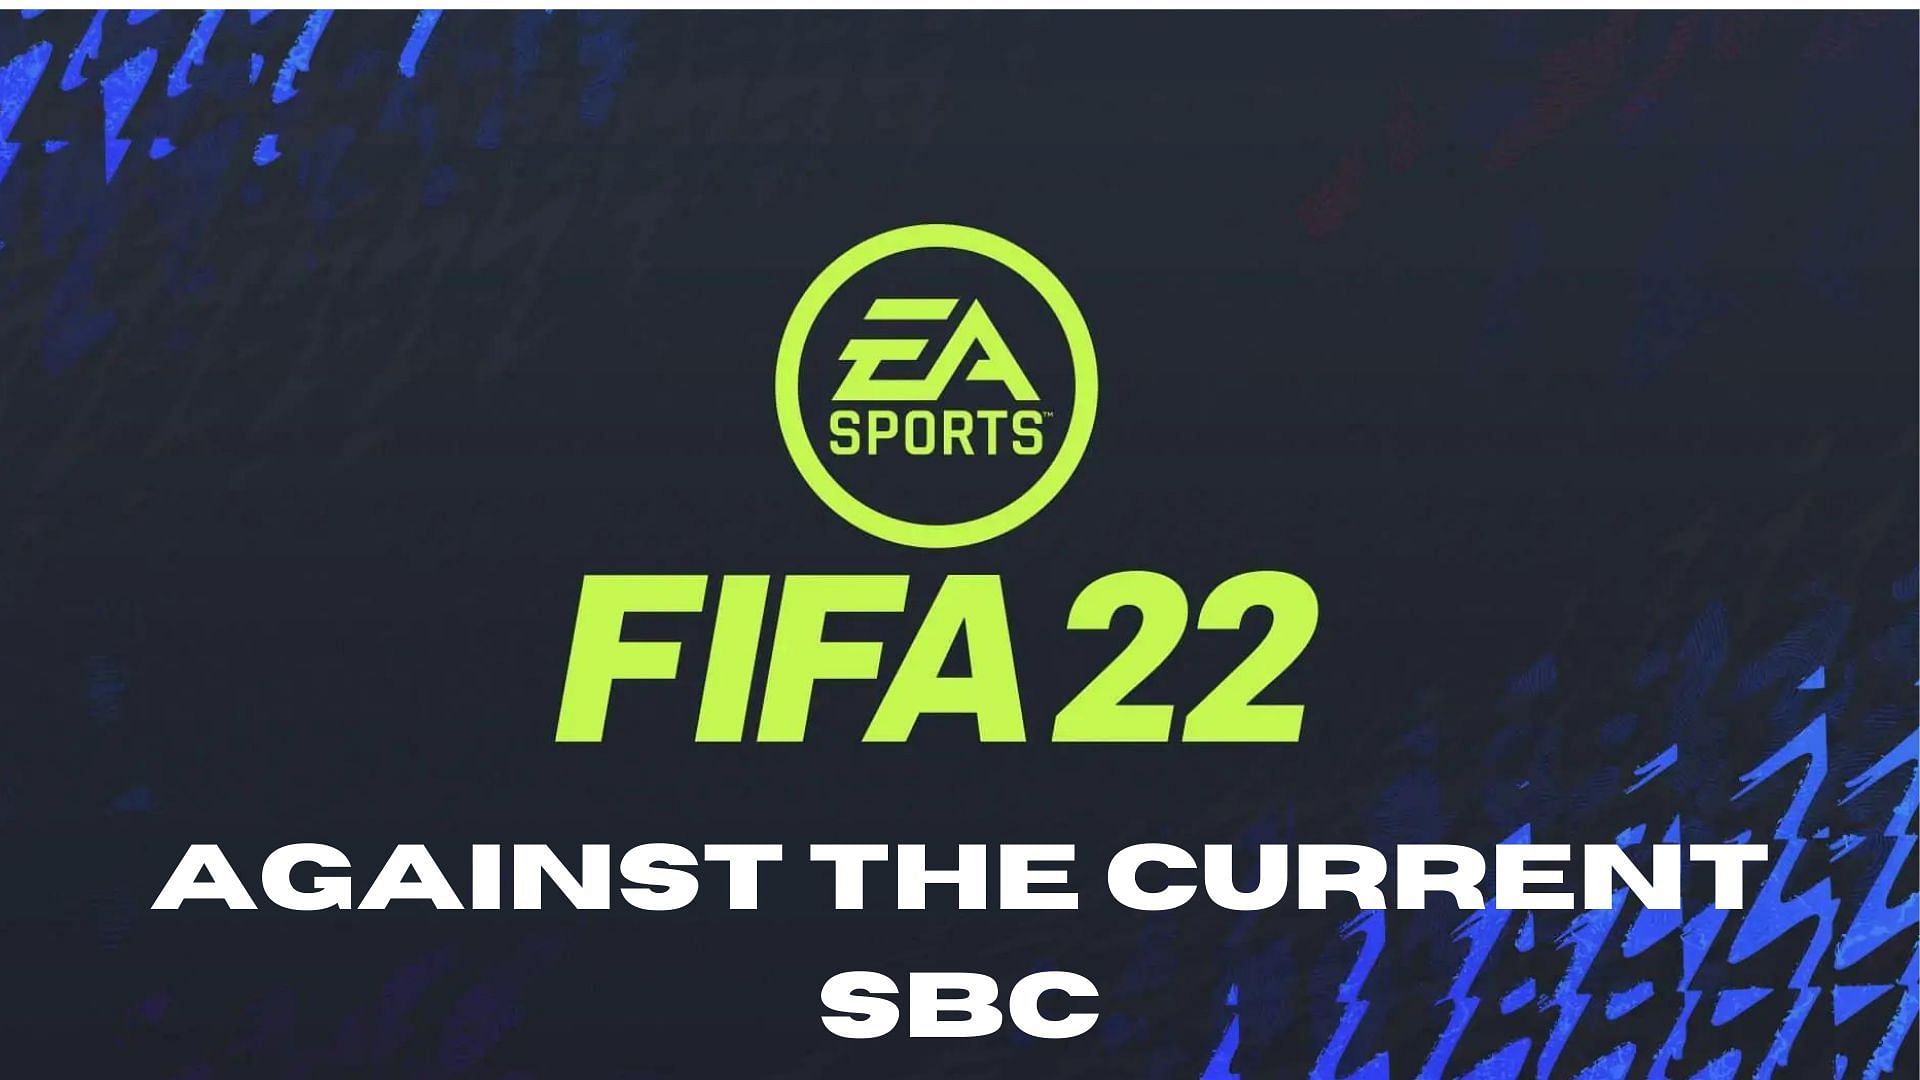 Against the Current SBC is the latest SBC drop in FIFA 22